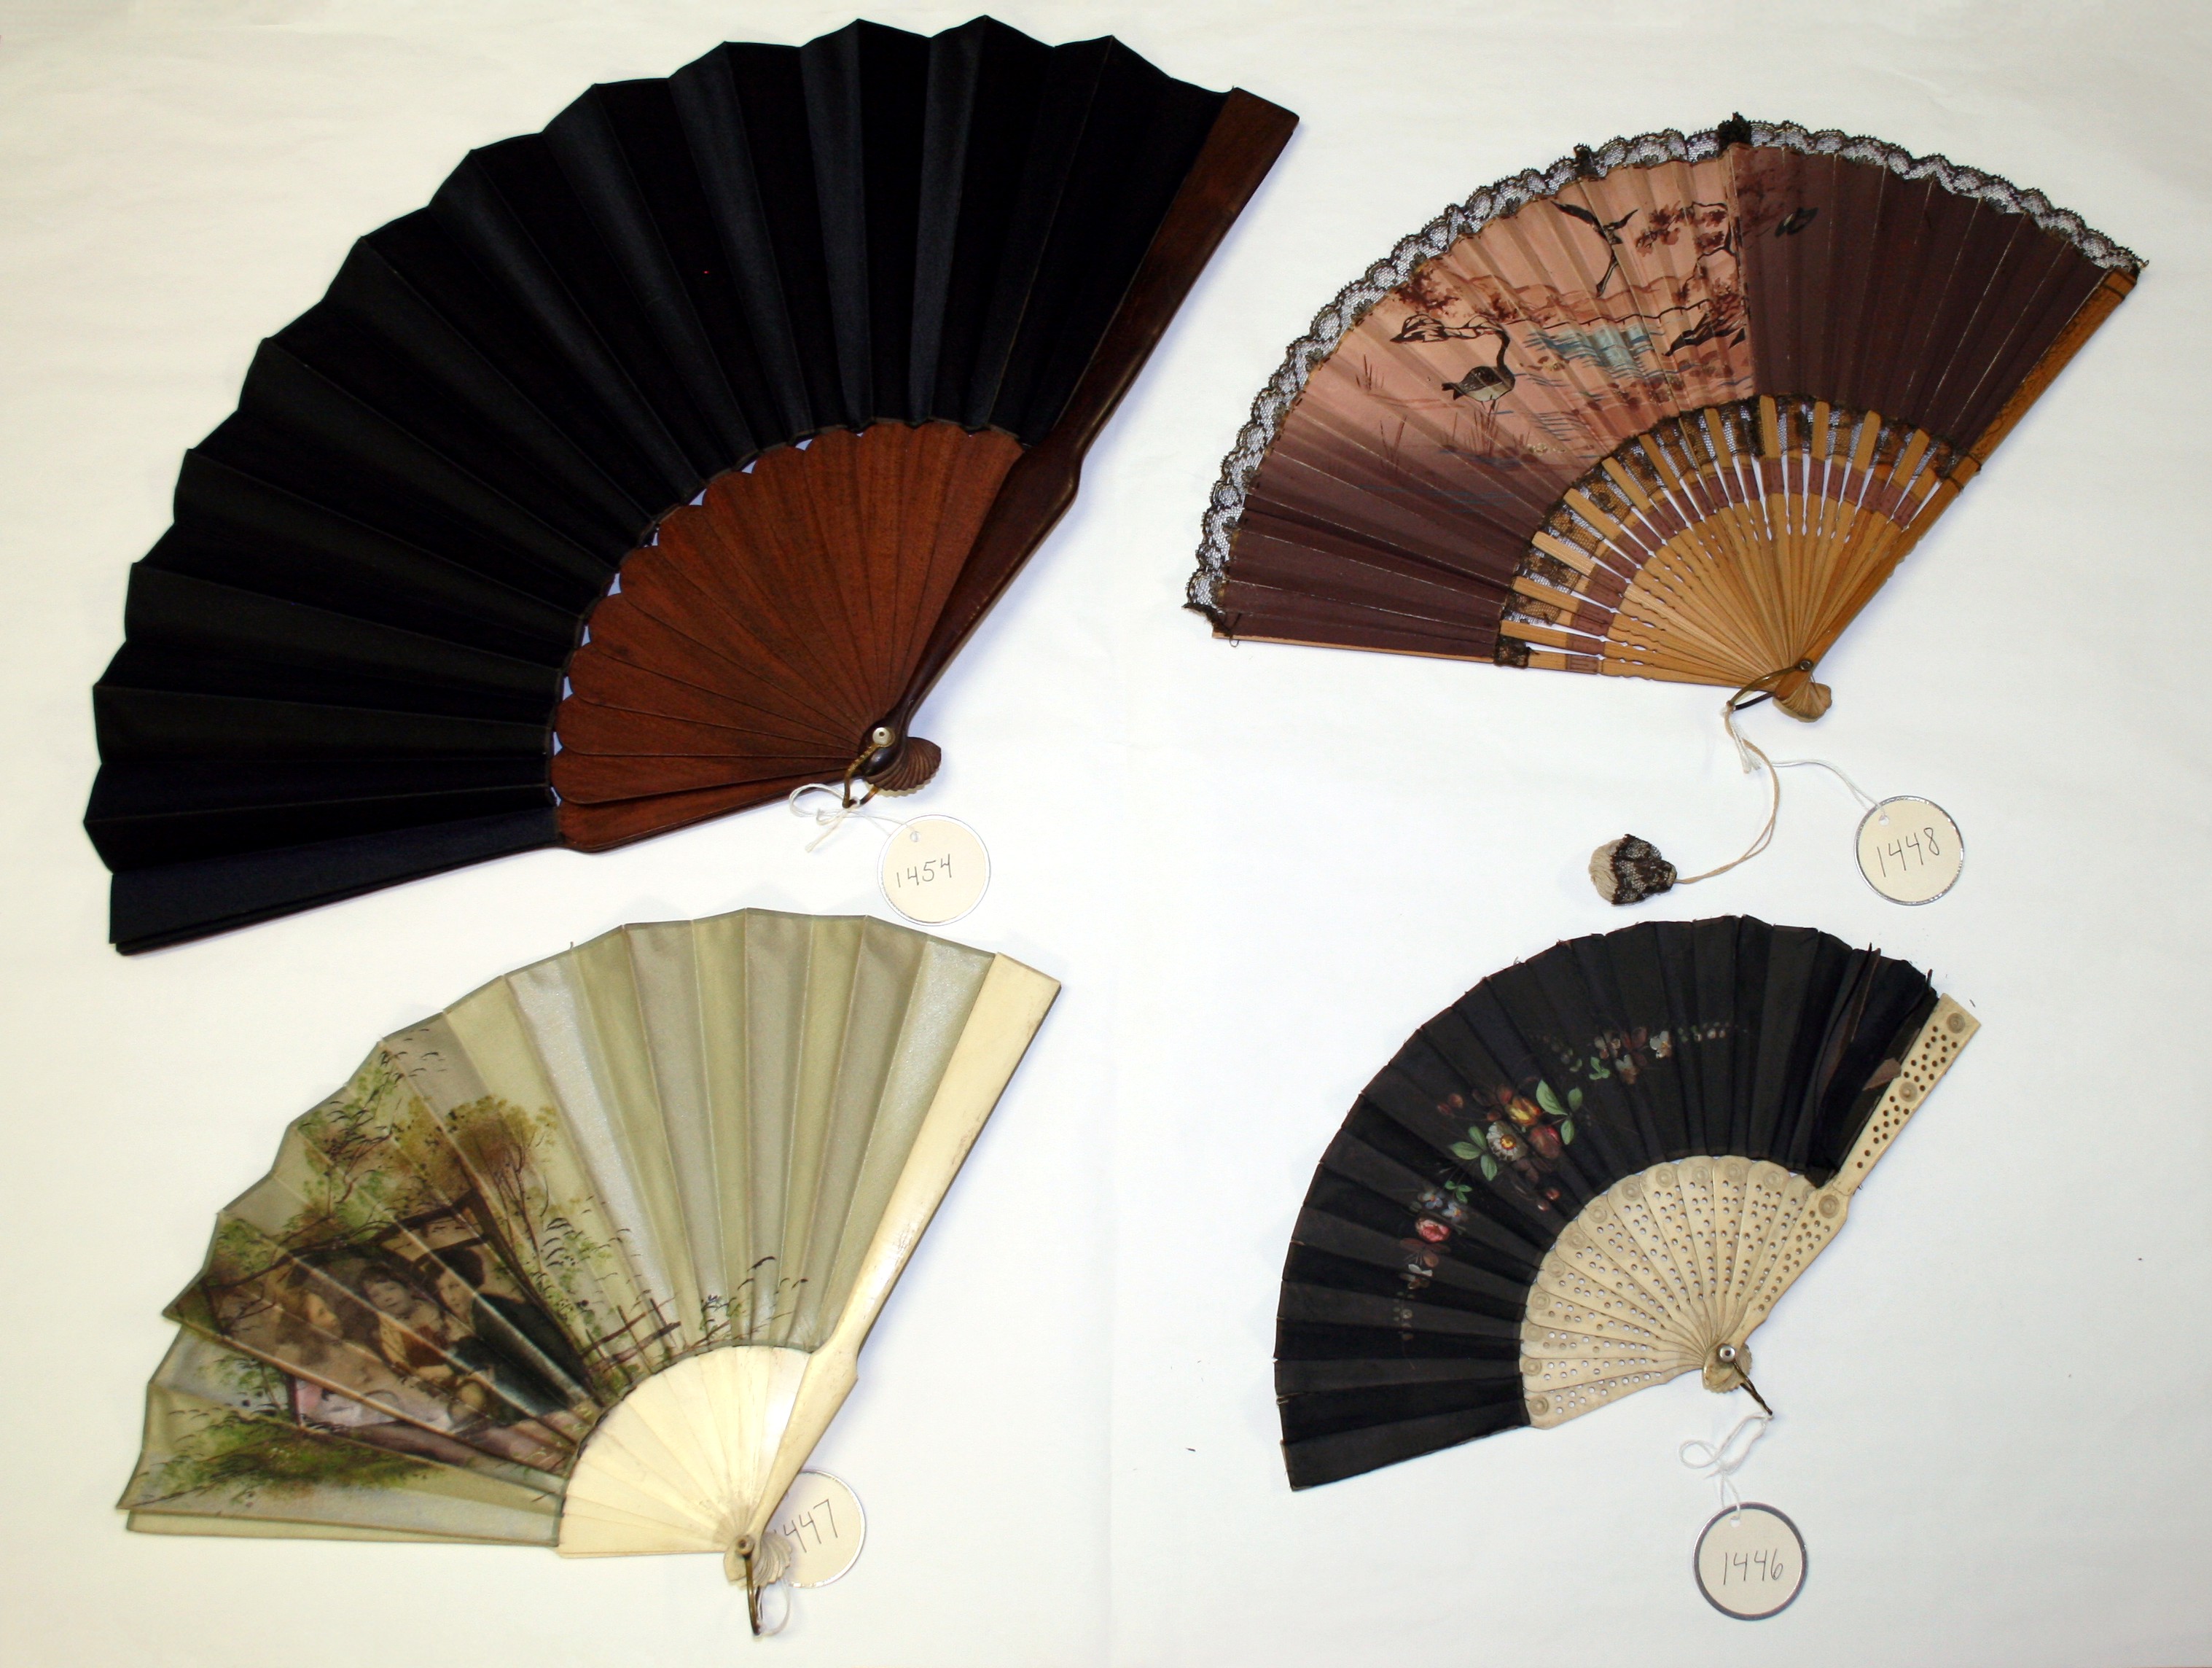 Ladies' Hand Fans - Gateway Arch National Park (U.S. National Park Service)  - Artifact of the Month